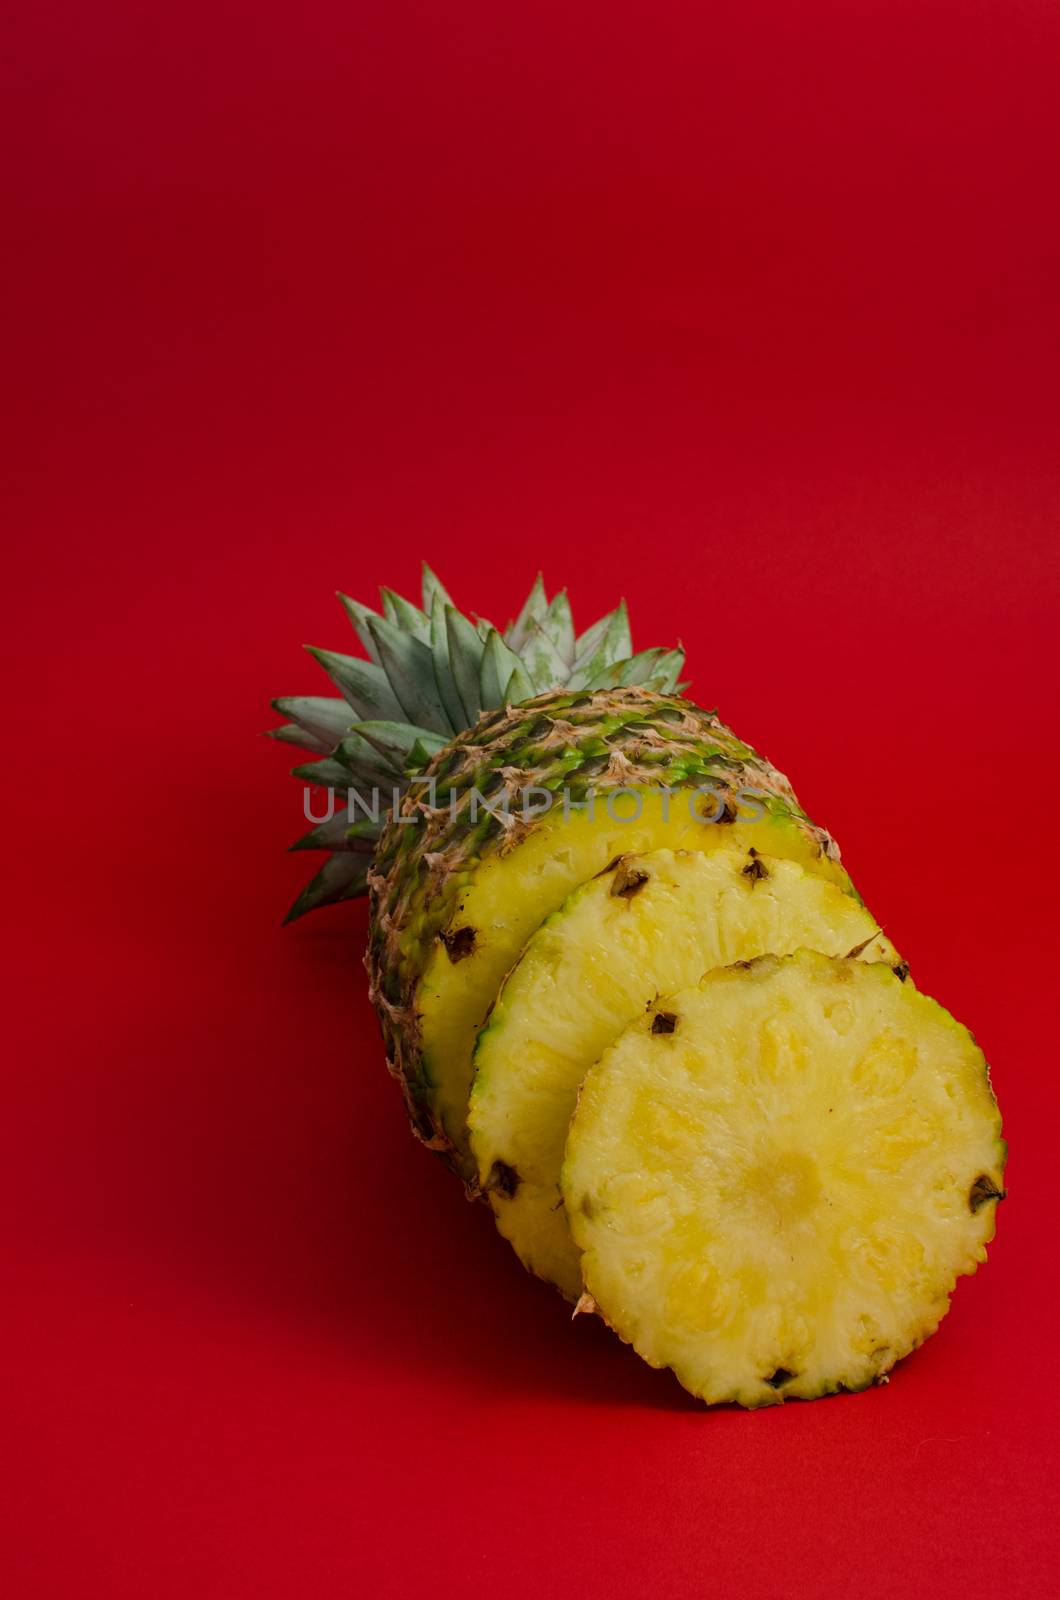 pineapple fruit on red background, circle slices